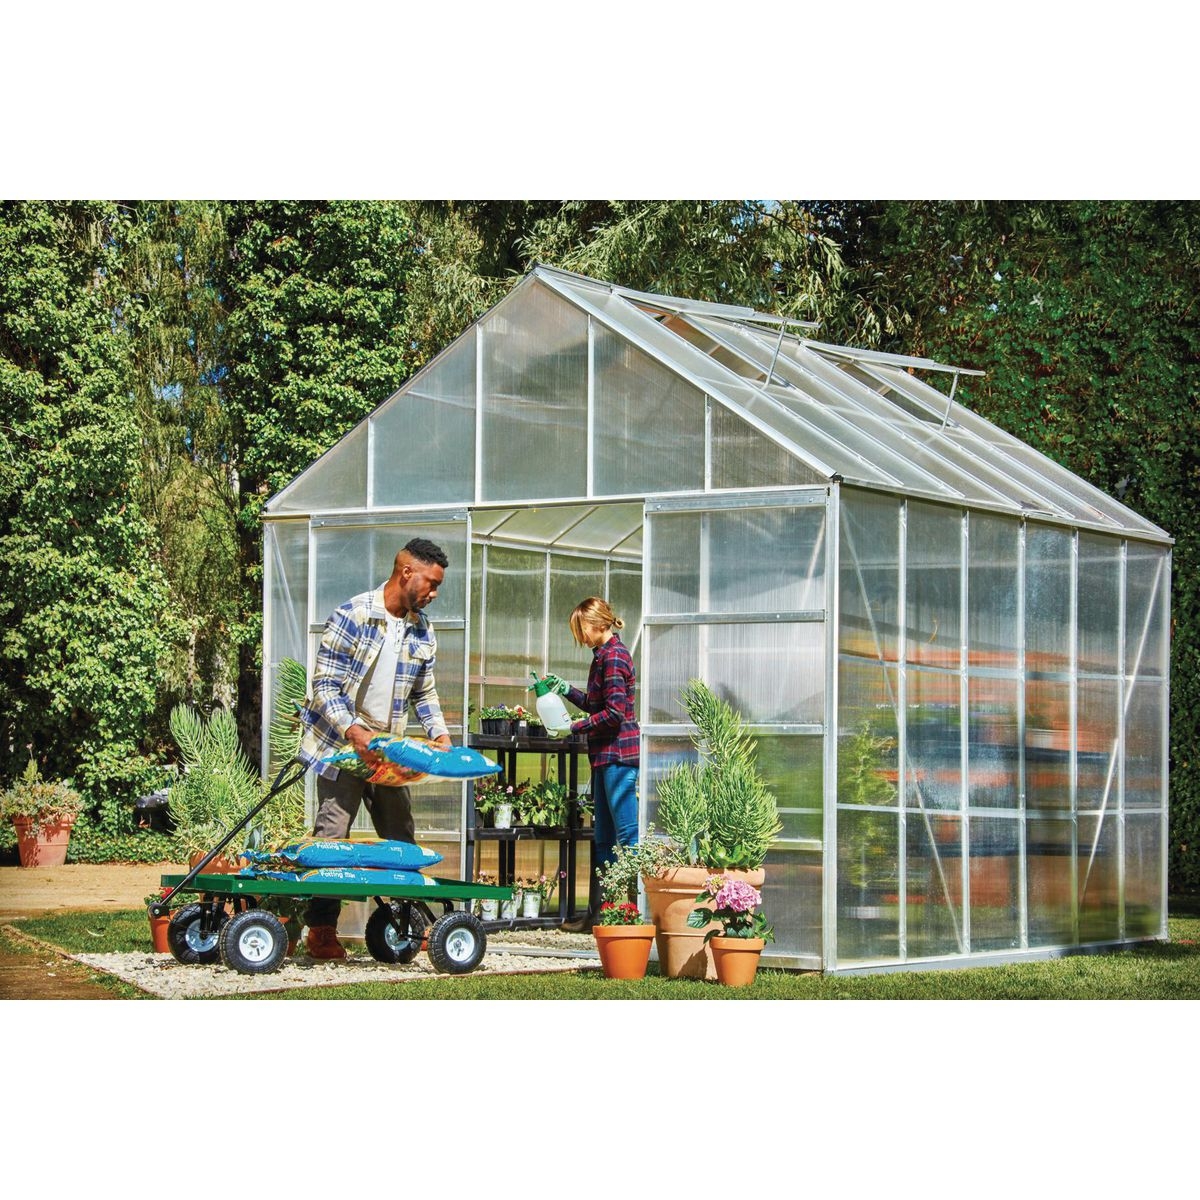 instructions for putting up a greenhouse